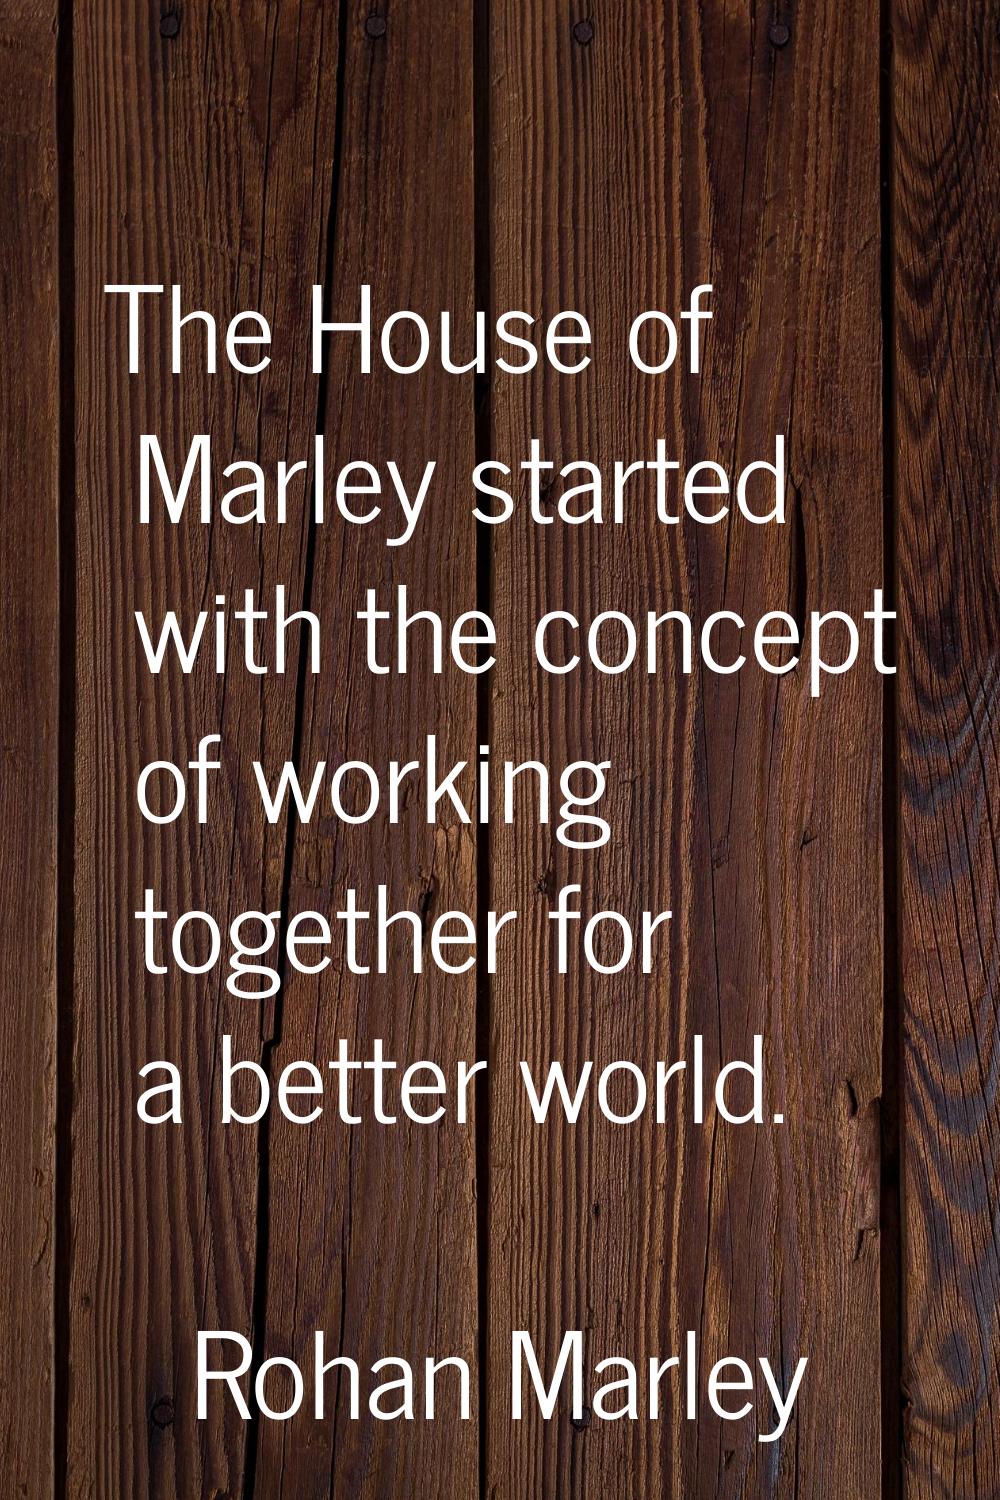 The House of Marley started with the concept of working together for a better world.